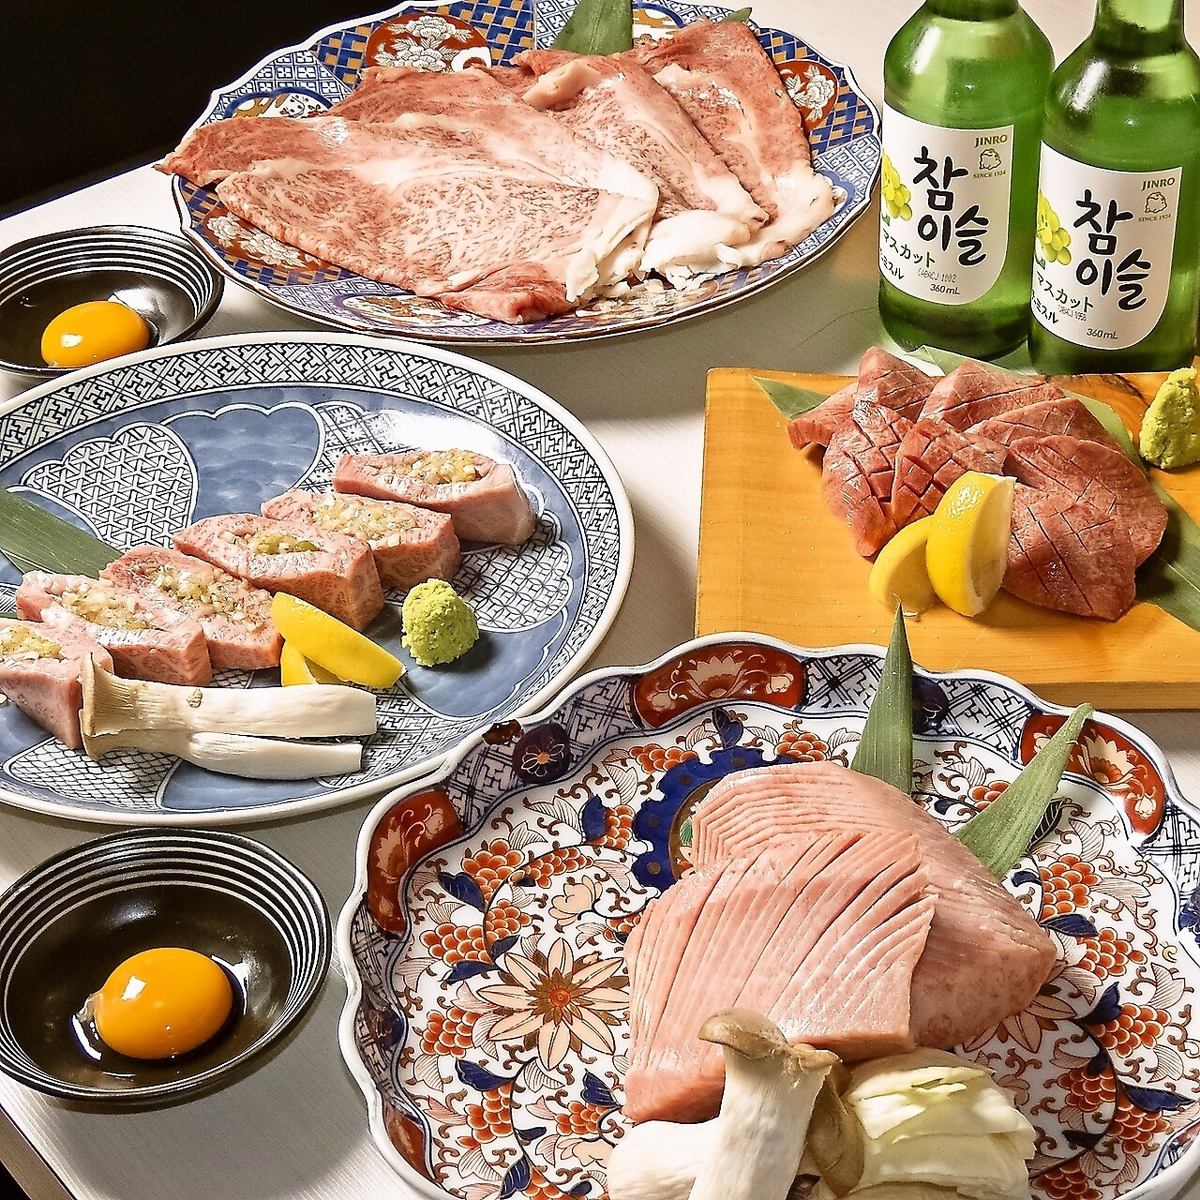 You can enjoy high-quality ingredients, from standard meats to rare cuts, cooked to perfection.A taste that even yakiniku connoisseurs will be pleased with.